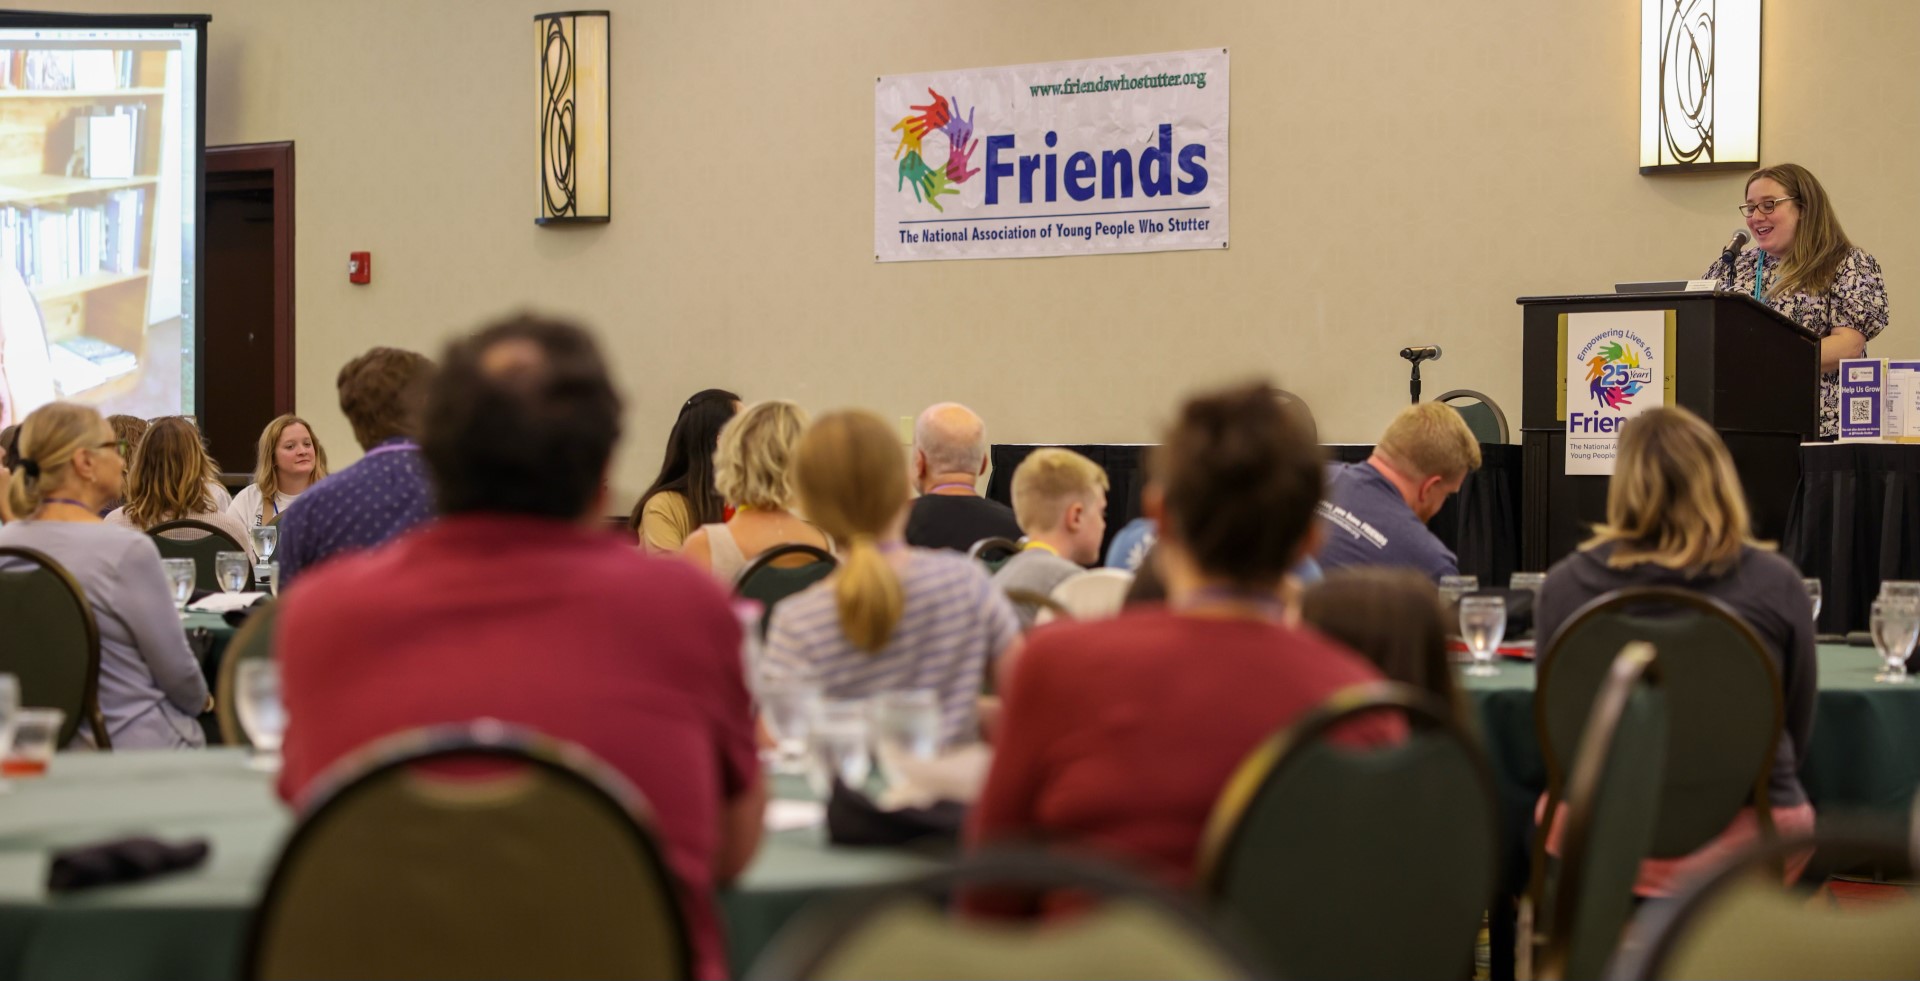 Caryn Herring speaks at a convention of Friends: The National Association of Young People Who Stutter.